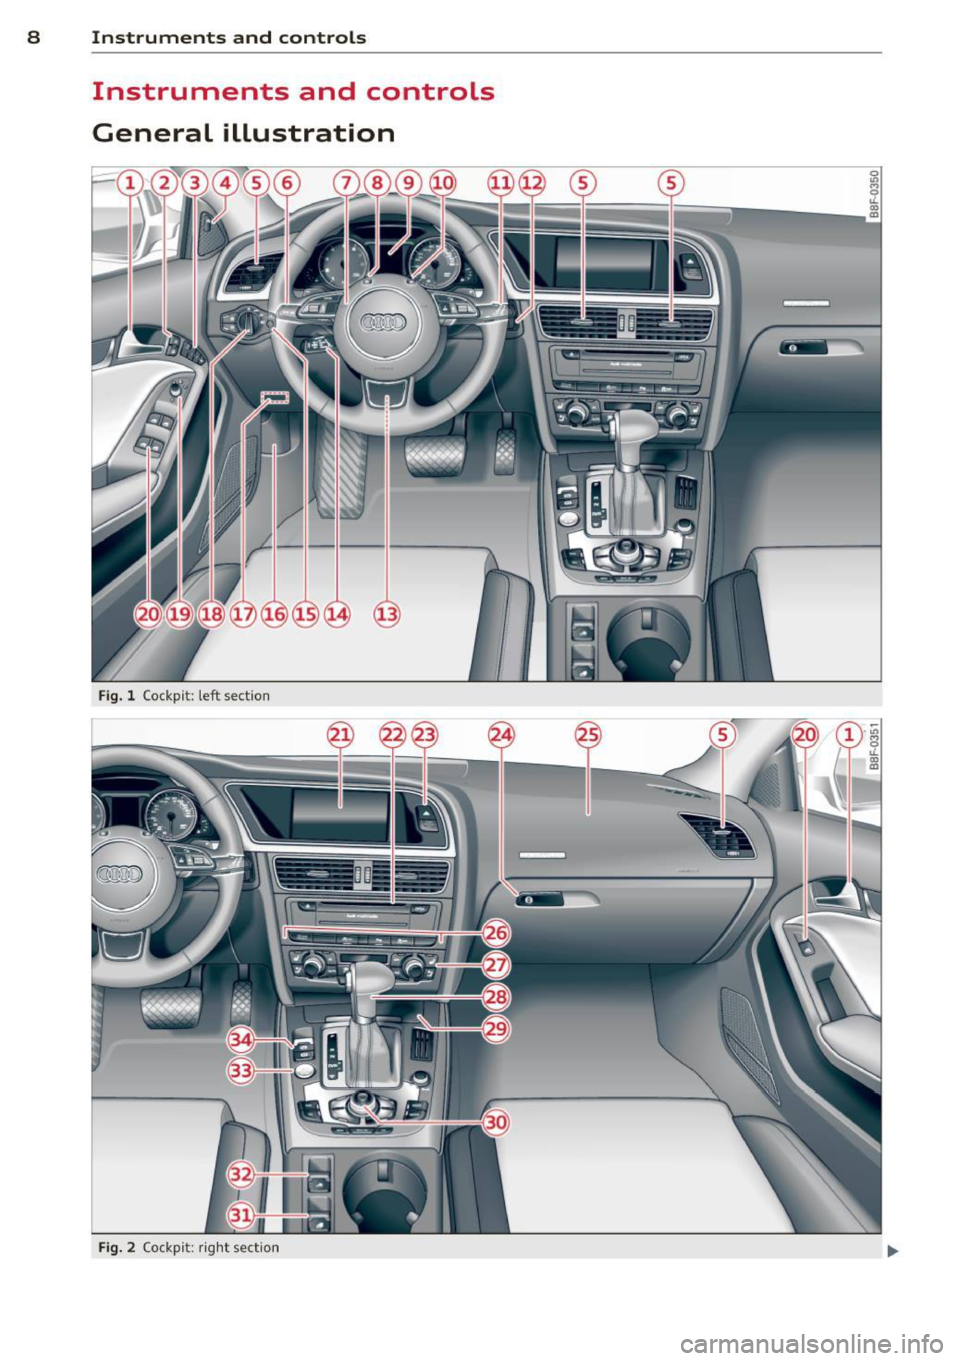 AUDI A5 CABRIOLET 2013  Owners Manual 8  Instruments and controls 
Instruments  and  controls 
General  illustration 
13 
Fig. l Cockp it:  left  sect io n 
Fig. 2 Co ck pi t: ri ght  sect io n 
0 
! CX) m 
I J  